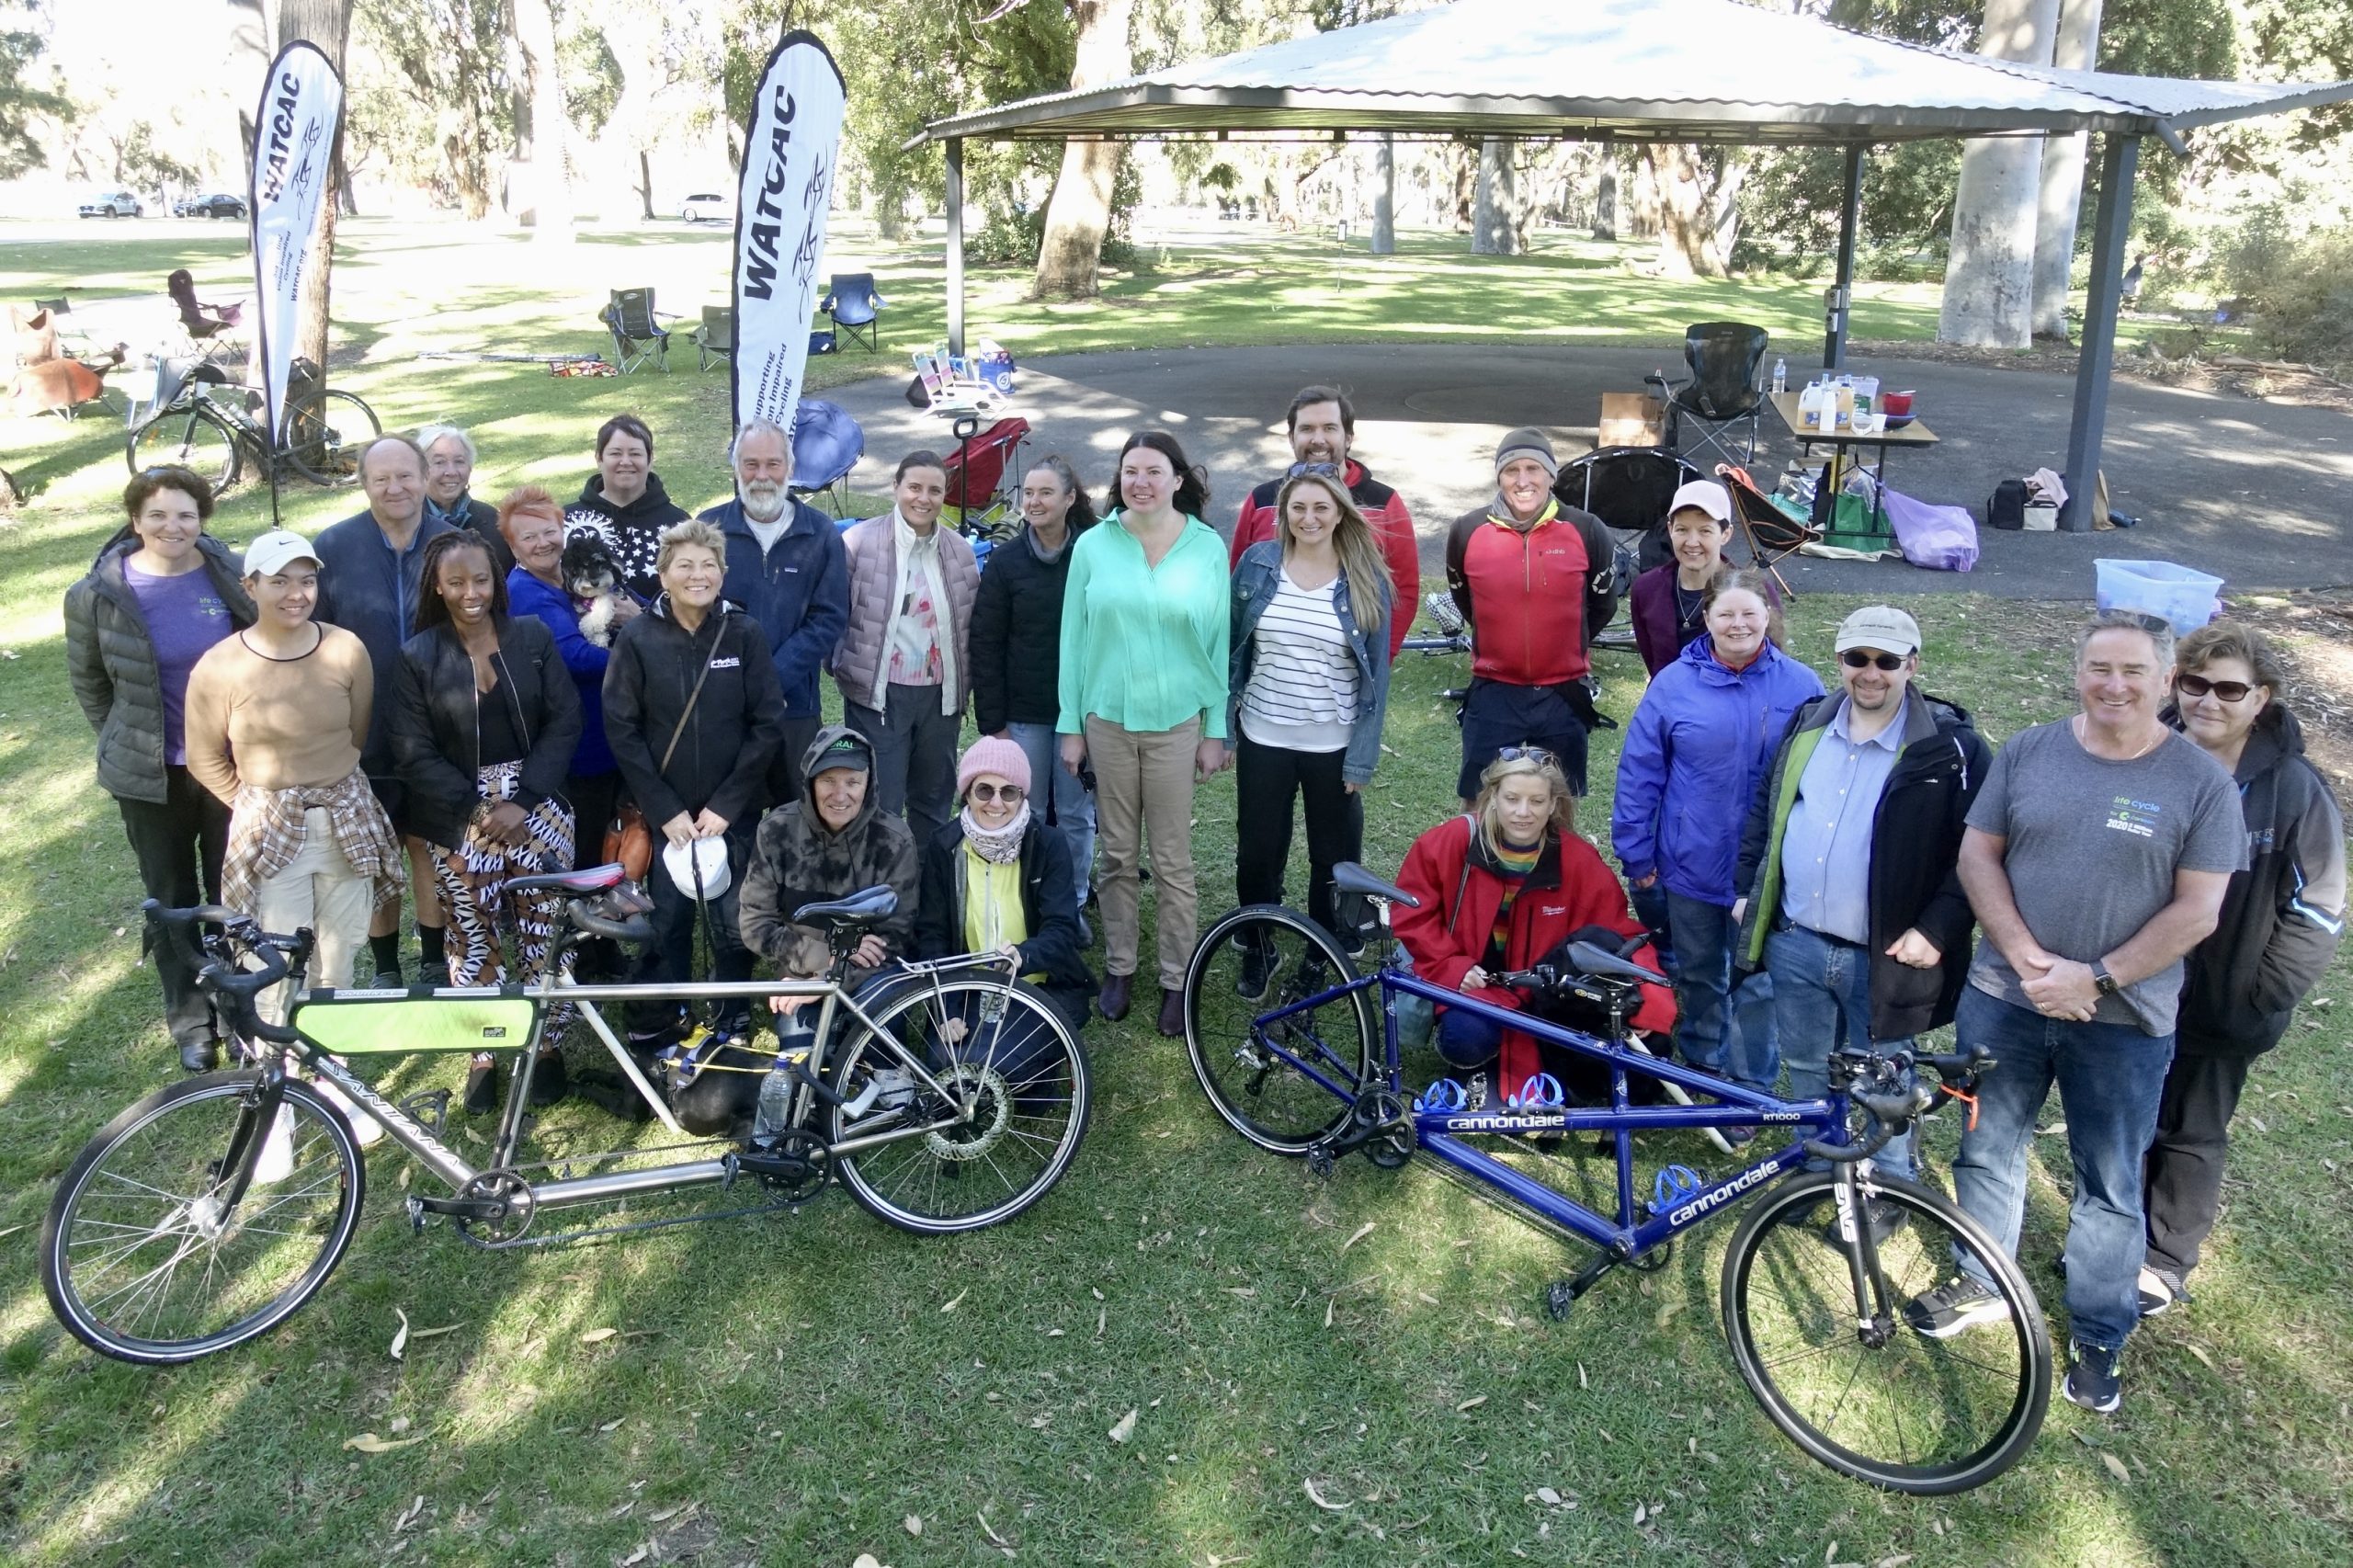 In early July we thanked our WATCAC volunteers with a group picnic in Kings Park. We were pleased to see some partners come along, with 24 people and three dogs in attendance.